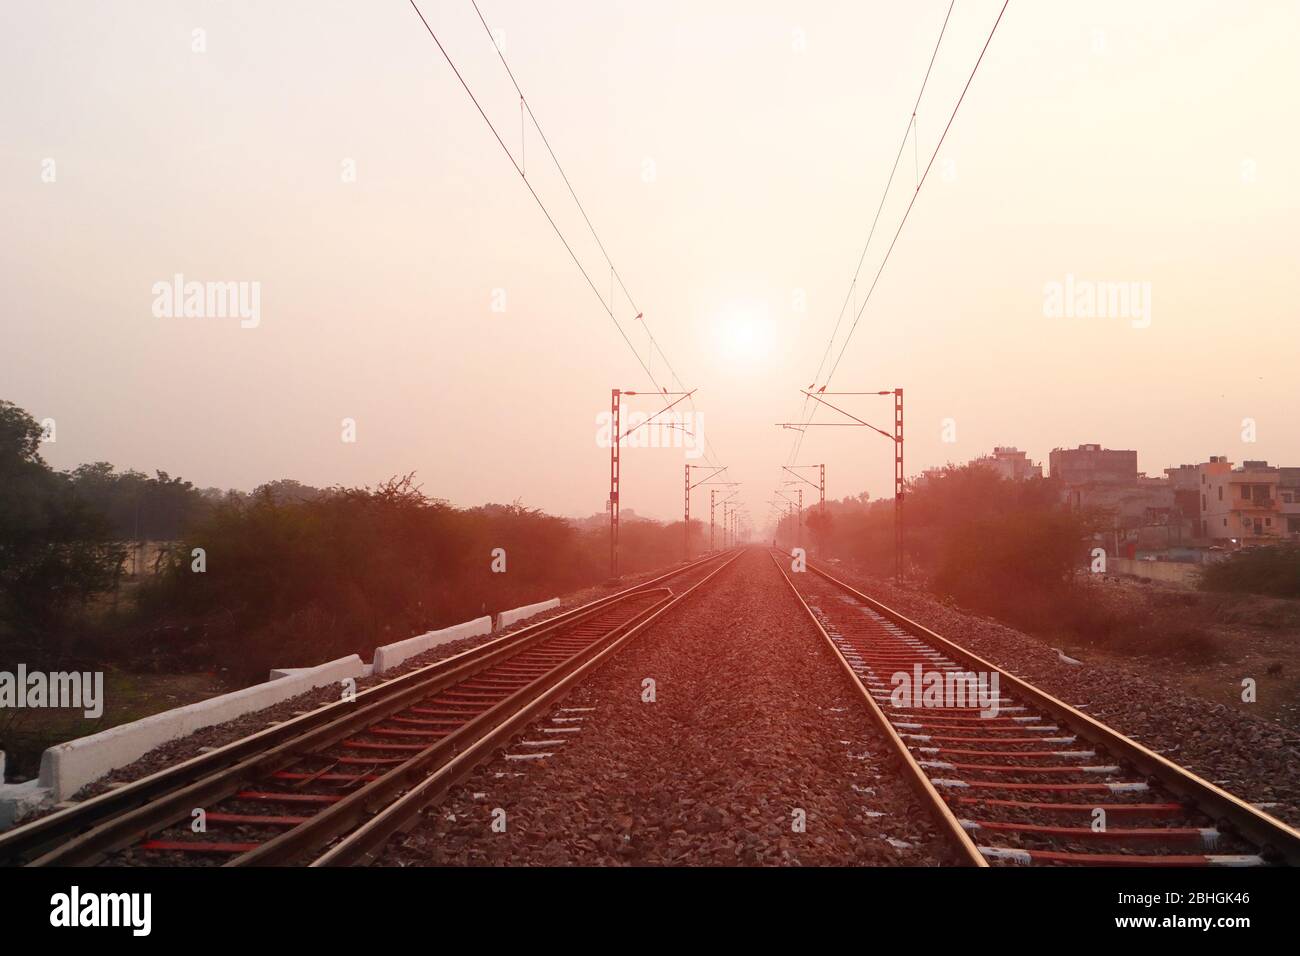 Train track during beautiful sunset time Stock Photo